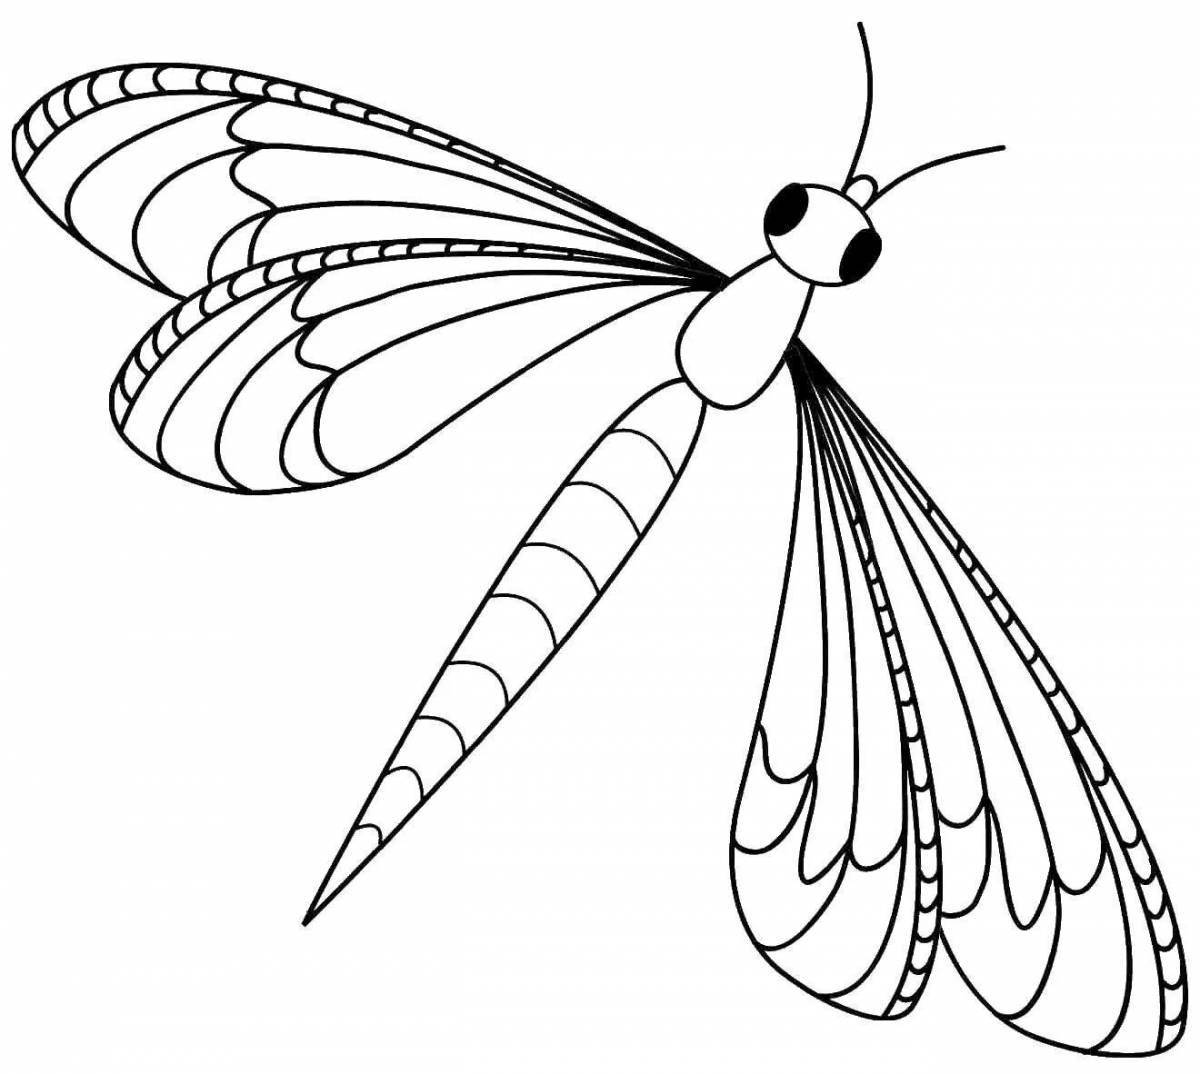 Fun coloring pages of insects